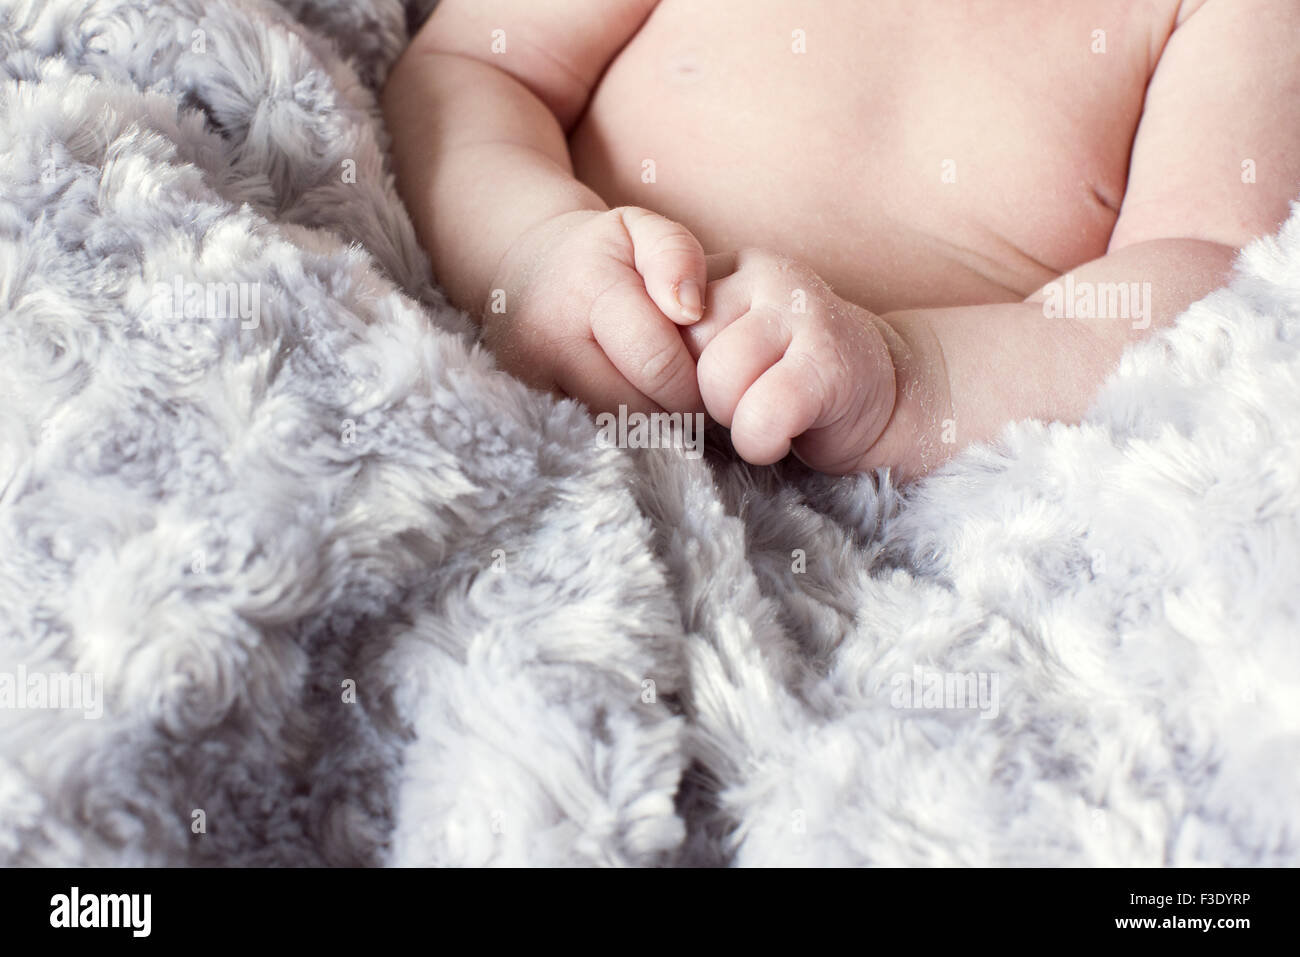 Infant wrapped in soft blanket Stock Photo